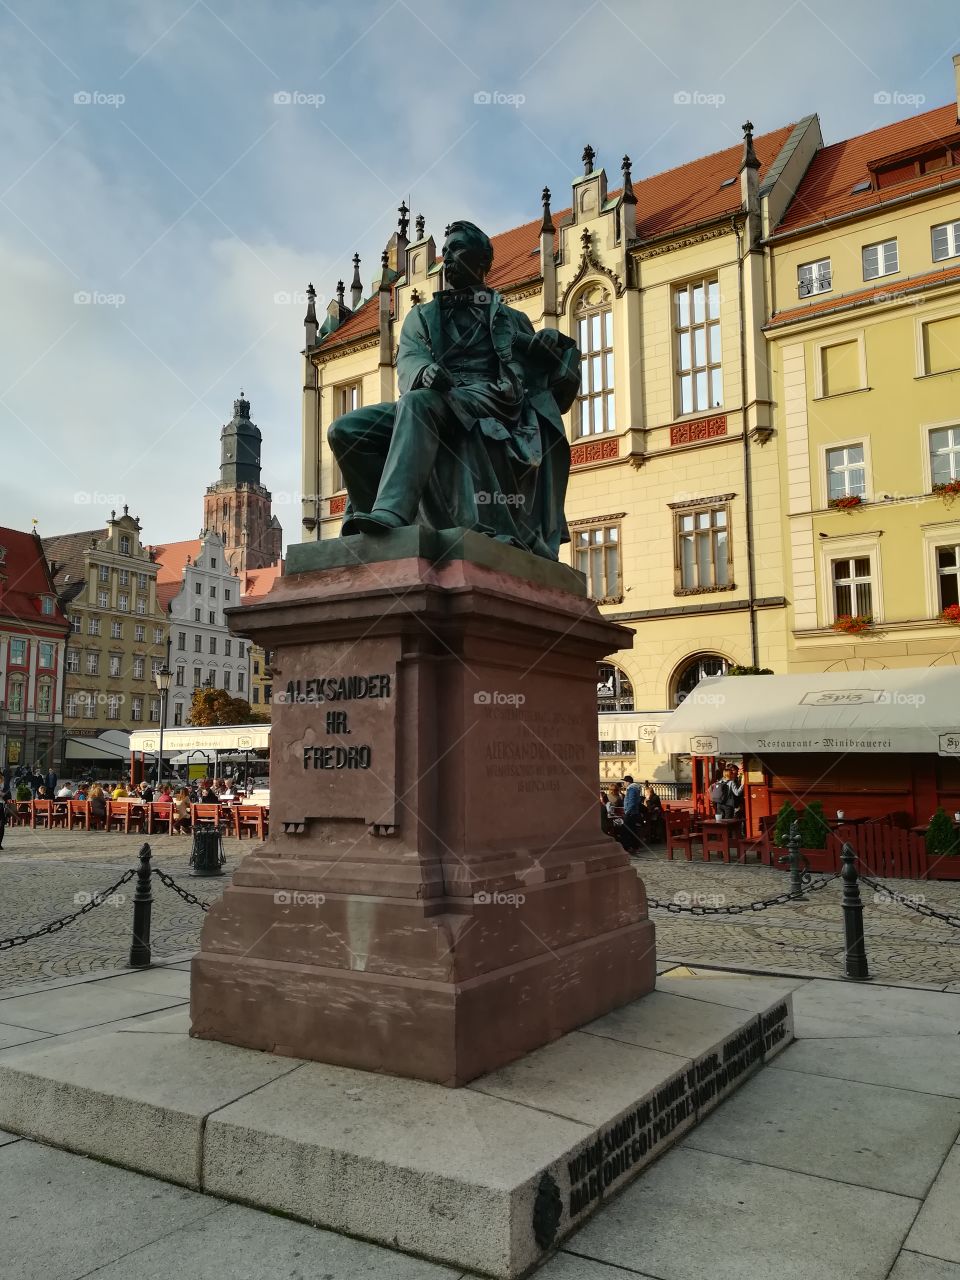 Wrocław Old Town Square - Fredro